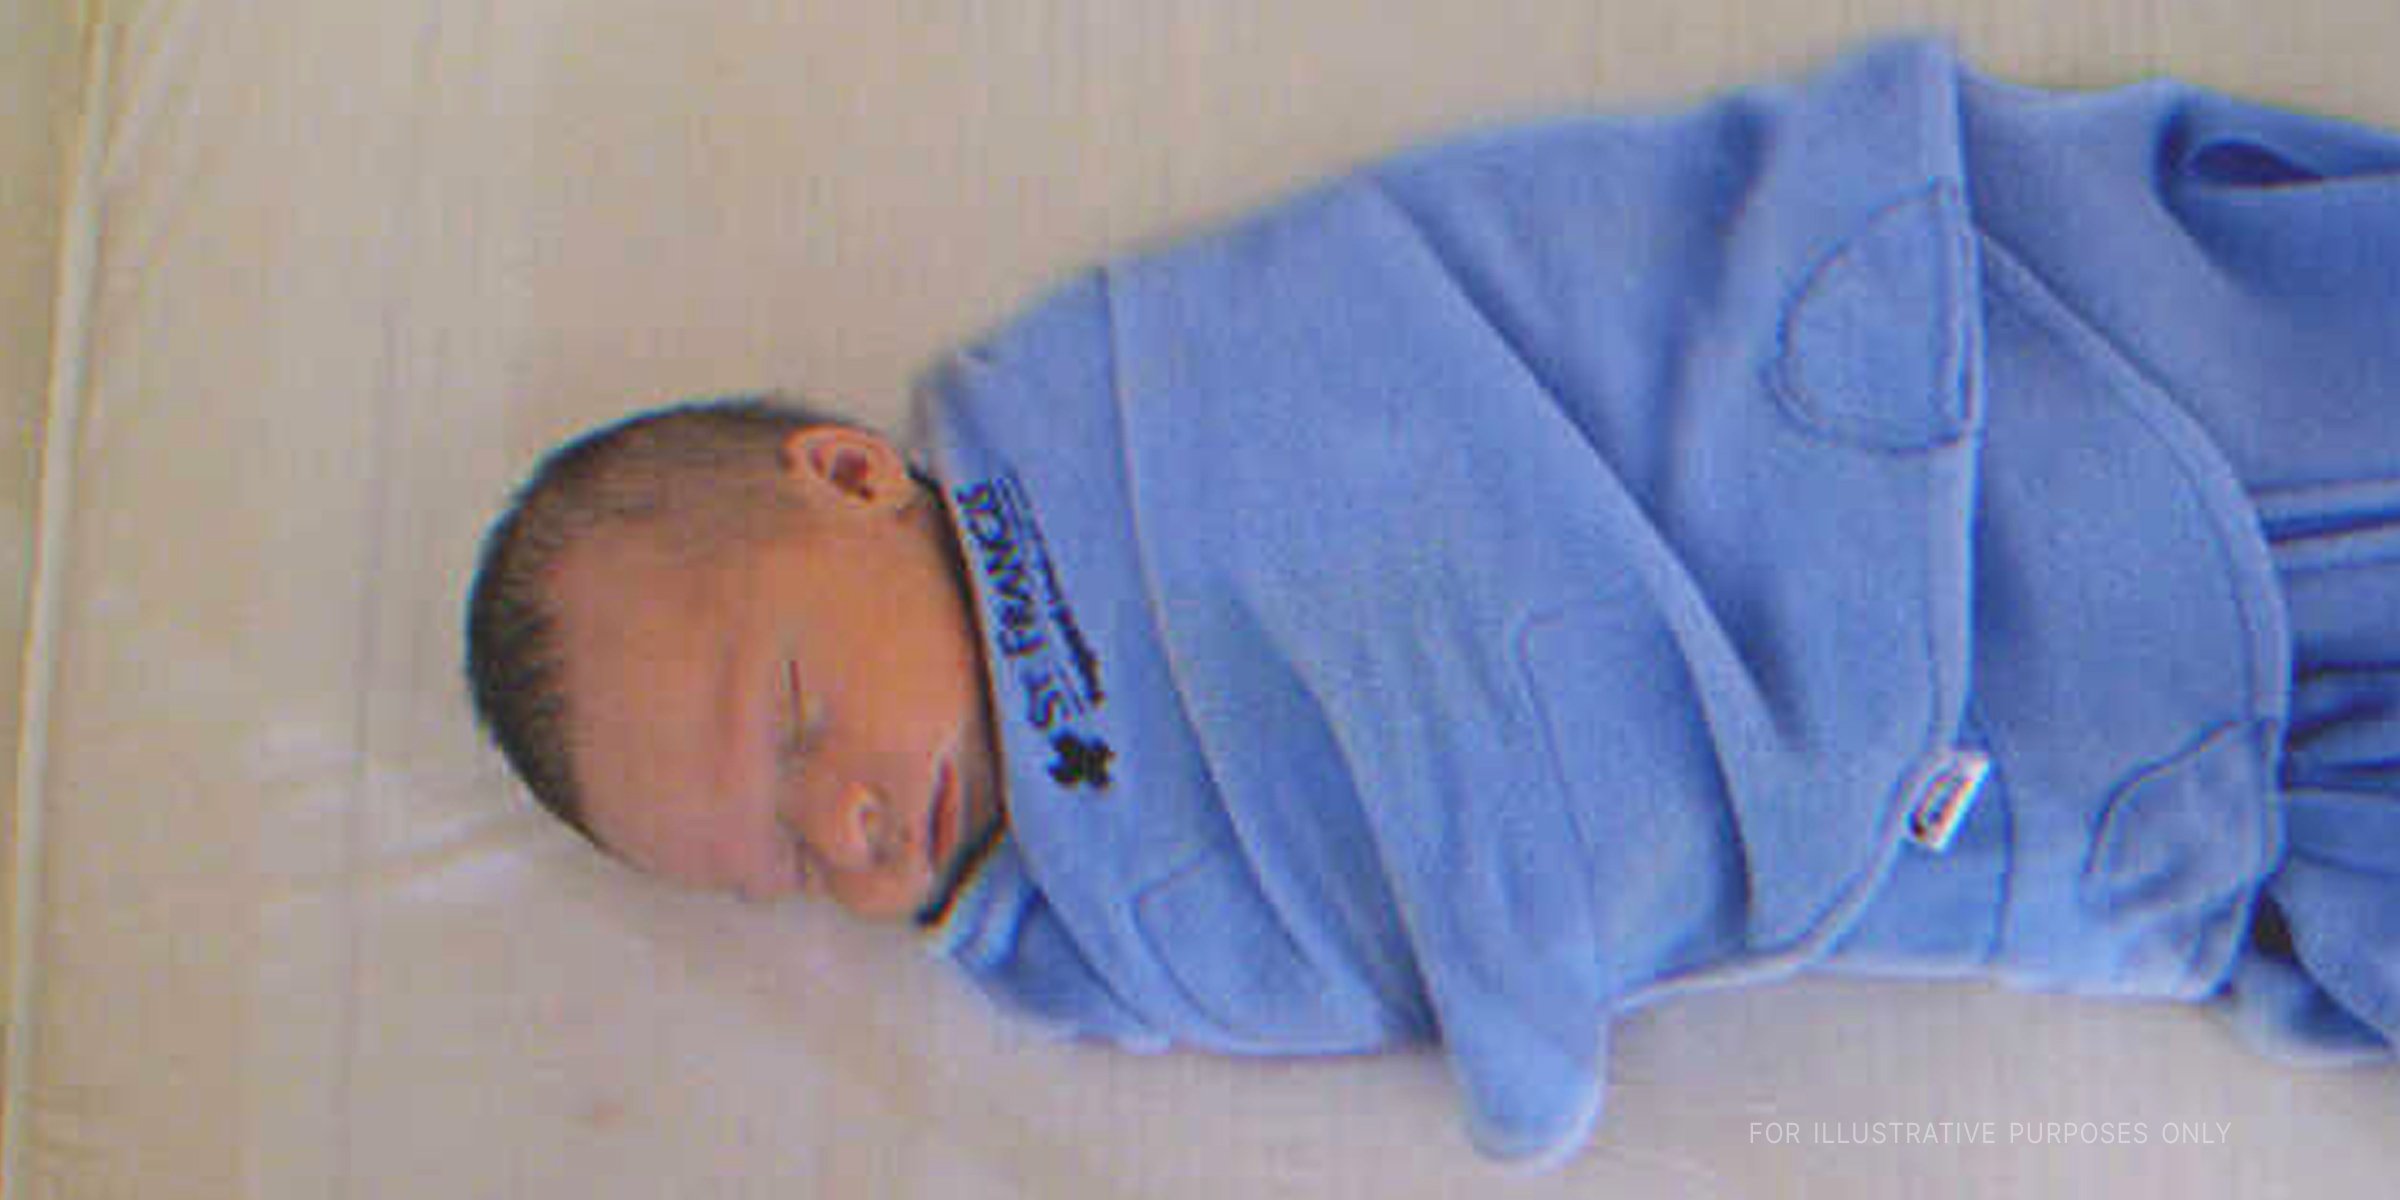 A baby wrapped in a blue cloth | Source: Flickr/EtanSivad (CC BY-SA 2.0)